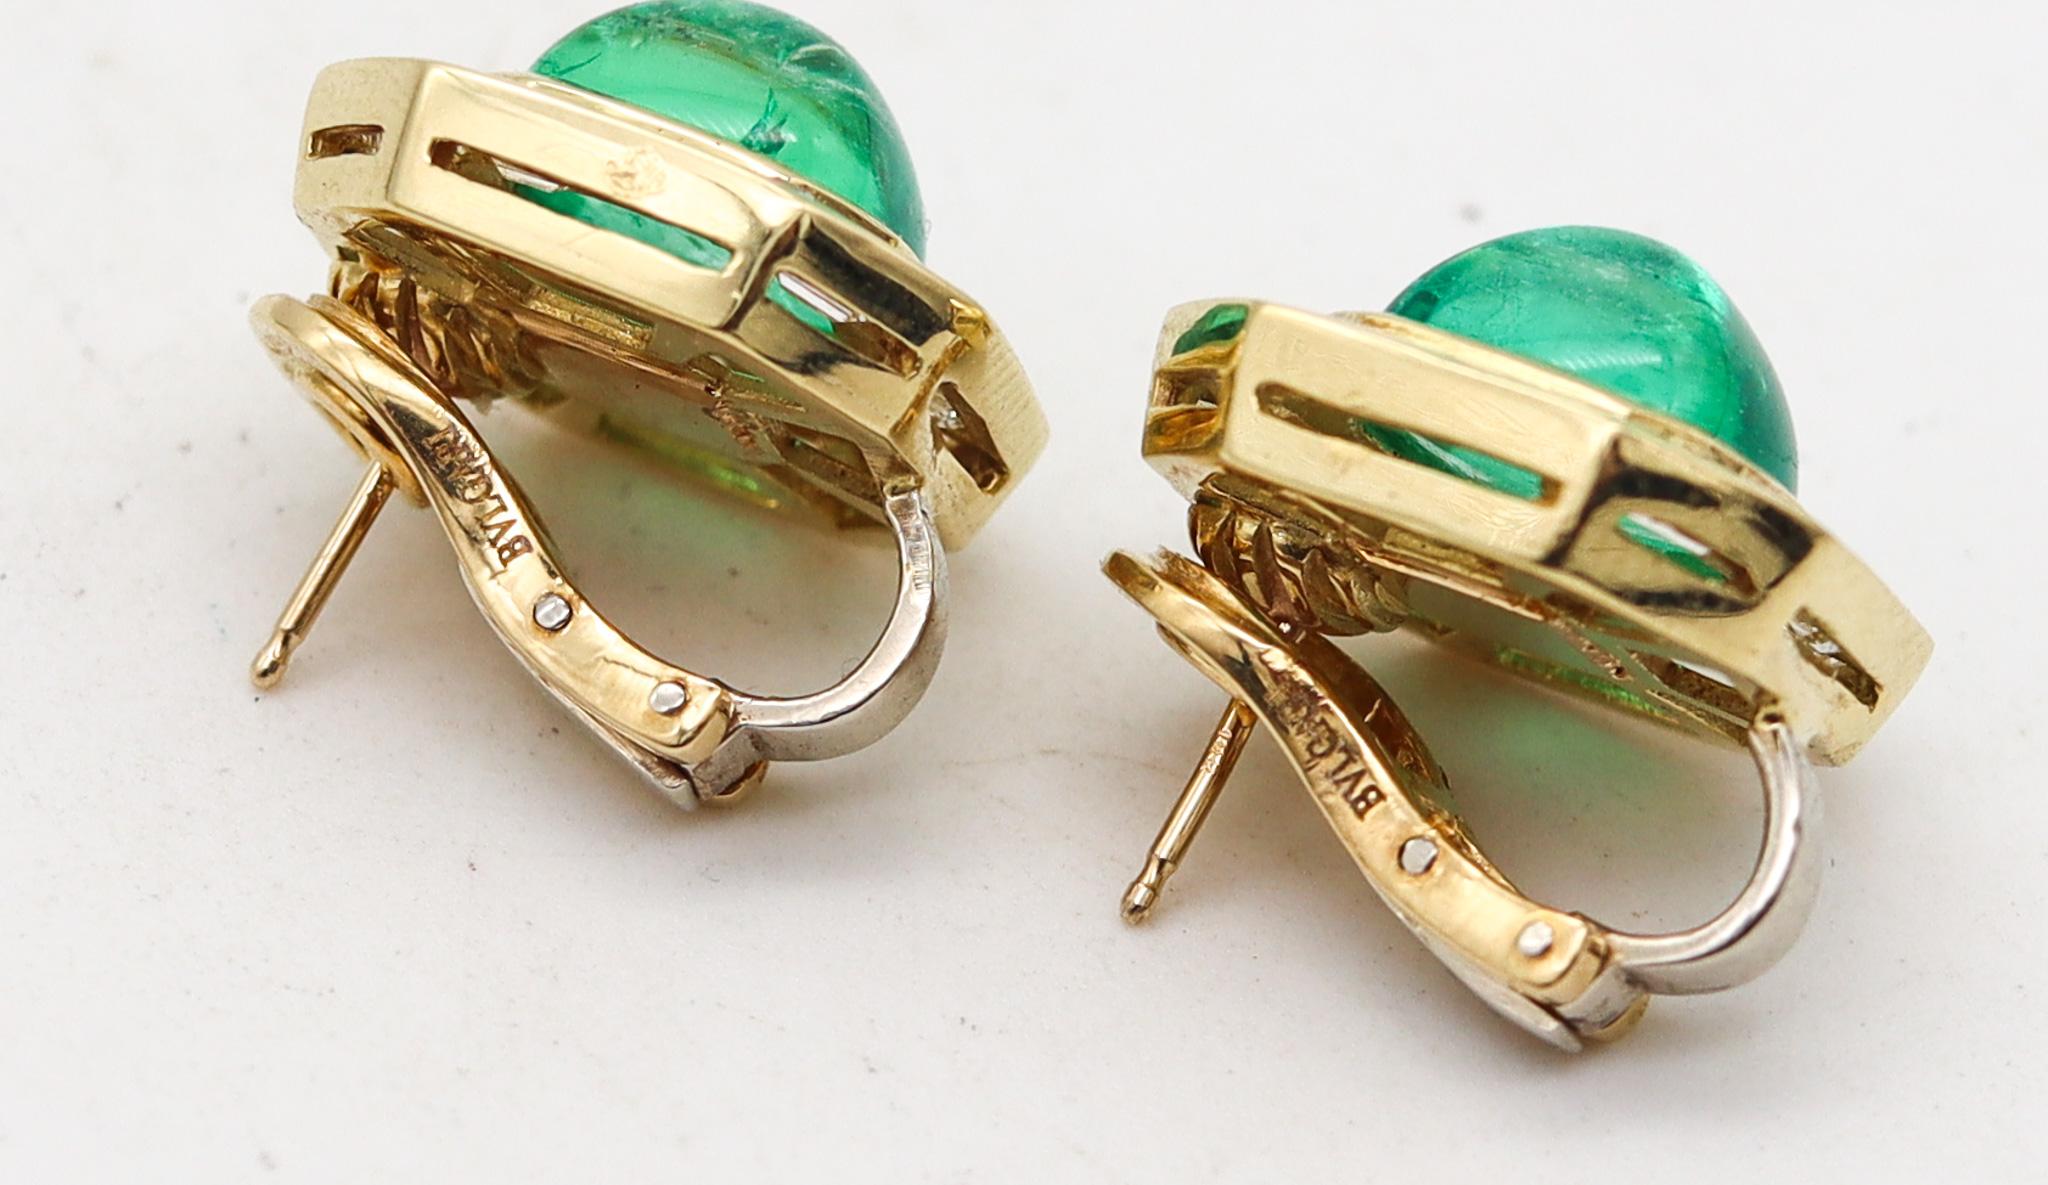 Modern Bvlgari Clip On Earrings In 18Kt Gold With 11.72 Ctw In Diamonds And Emeralds For Sale